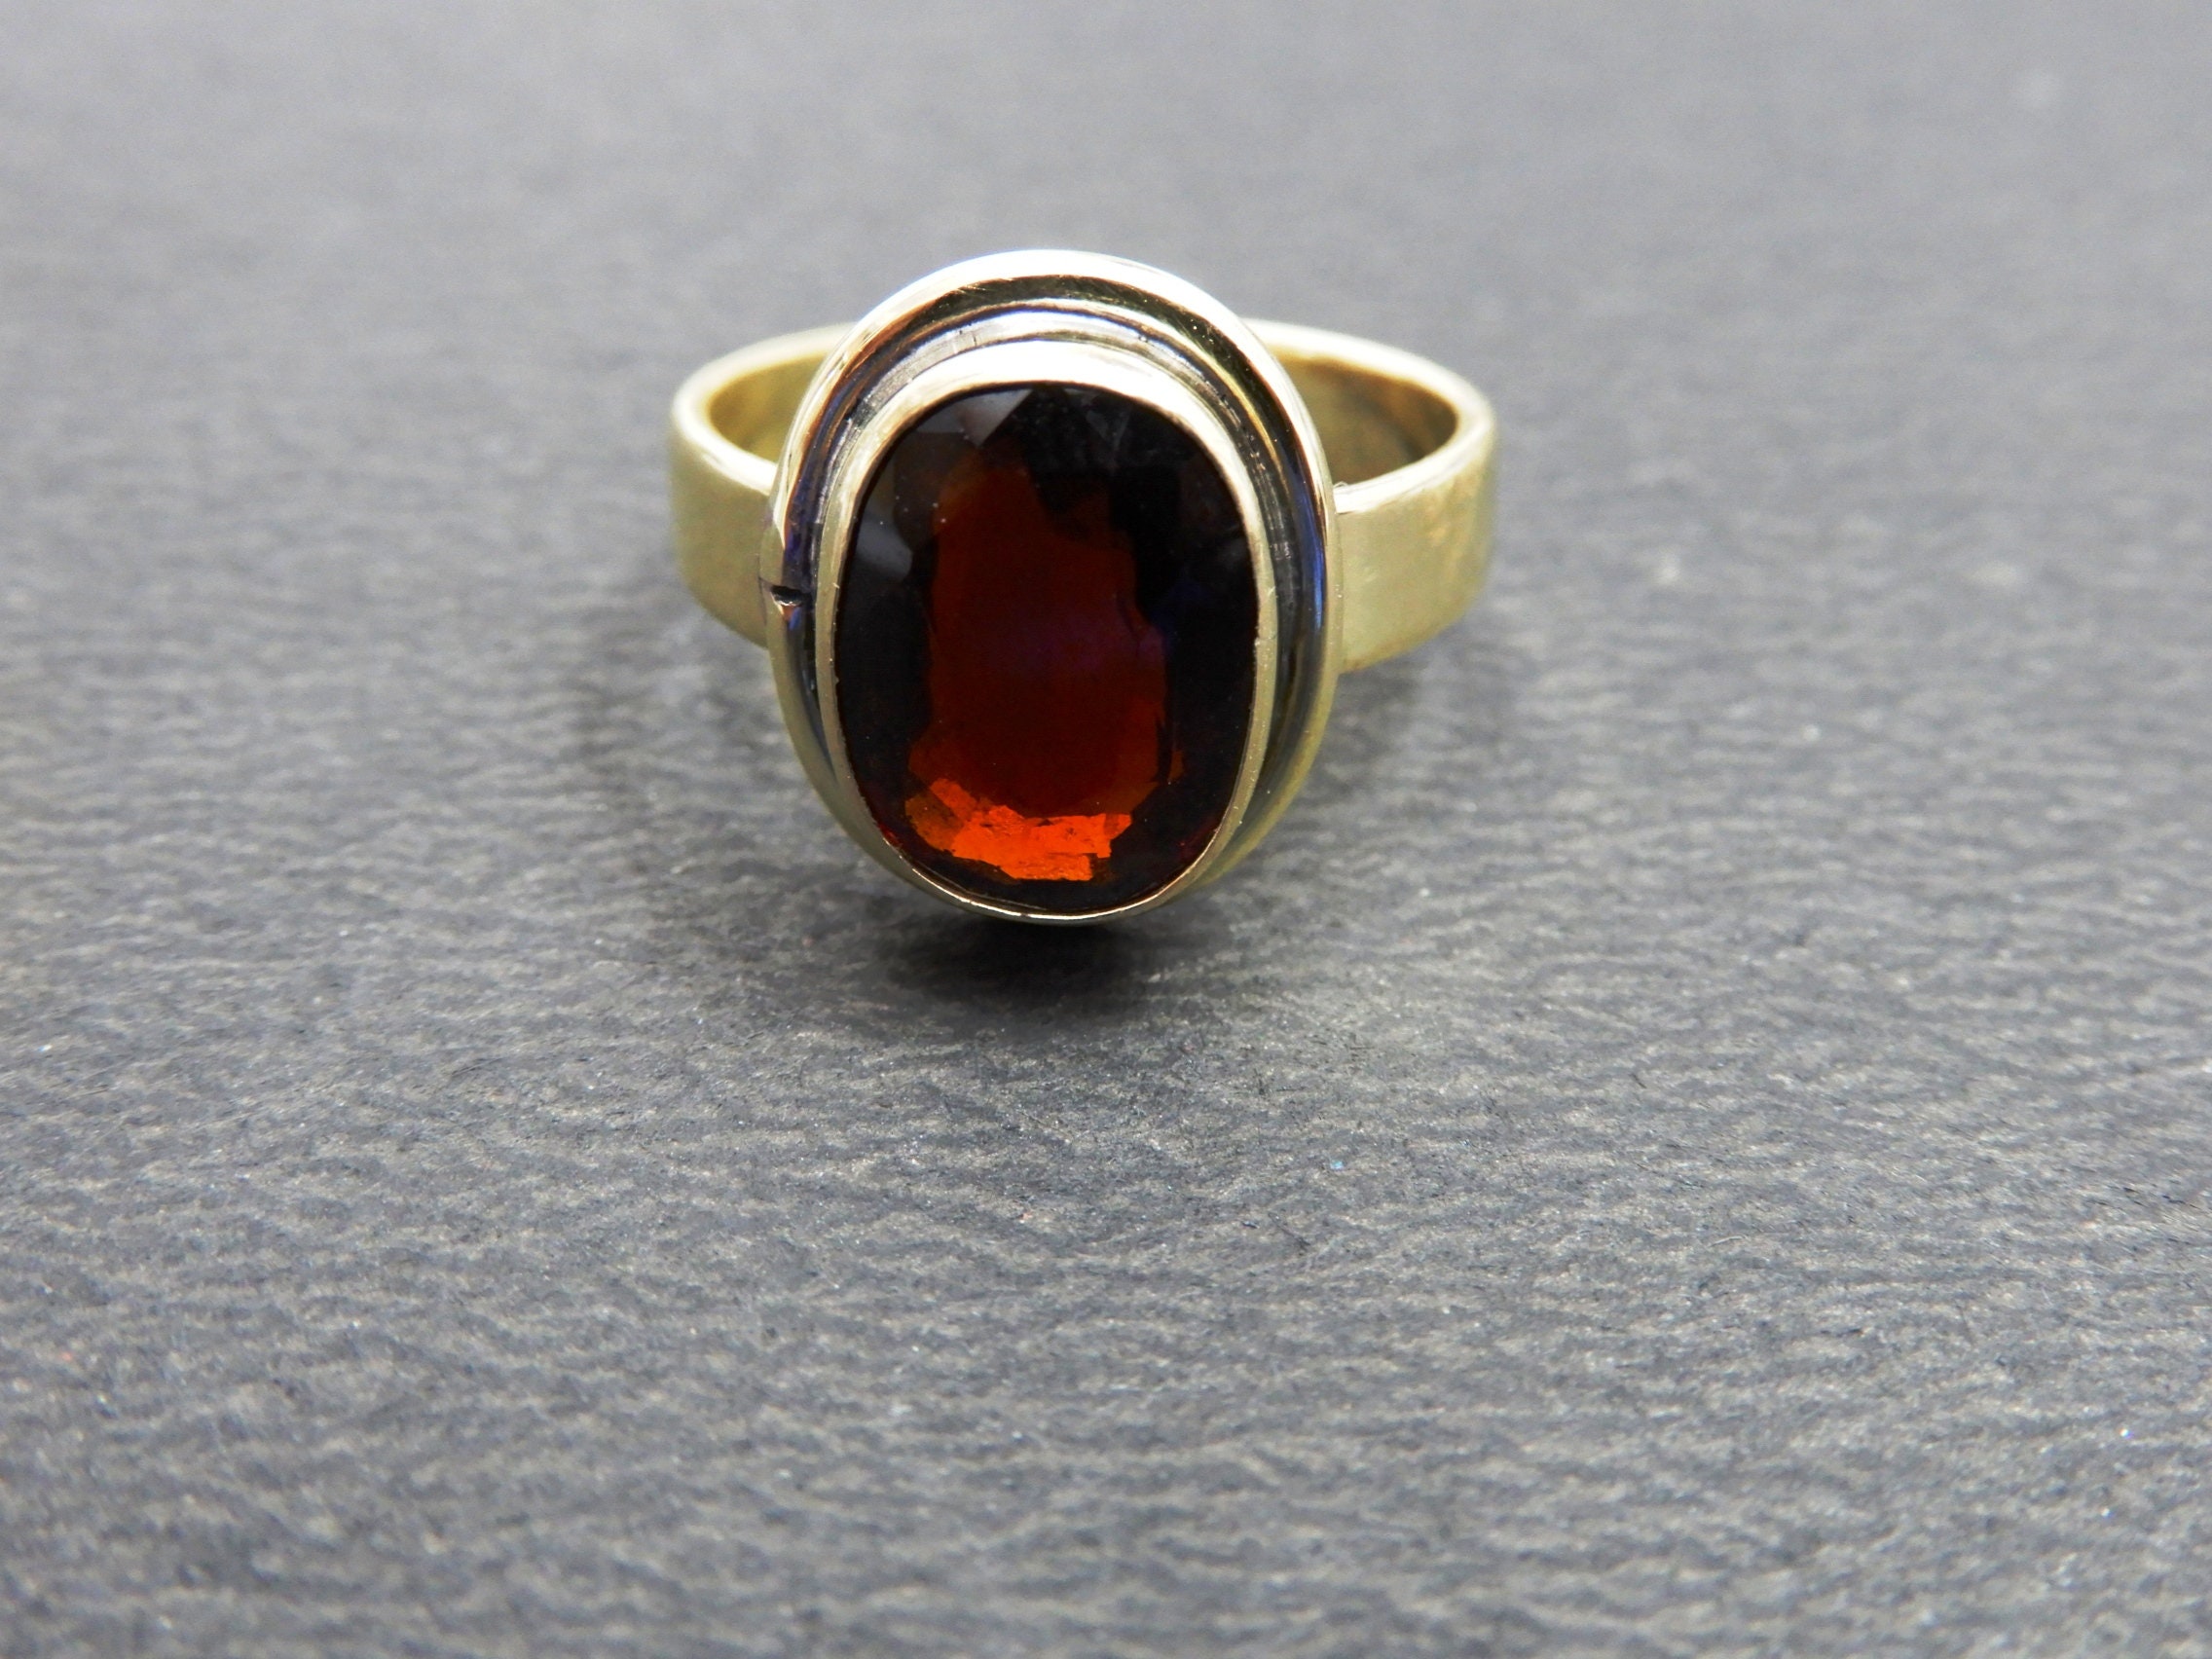 Buy RRVGEM 4.25 Ratti / 3.70 Carat Natural Gomed Stone Astrological Gold  Ring Adjustable Gomed Hessonite Astrological Gemstone for Men and Women  (Lab - Tested)WITH CERTIFICATE at Amazon.in